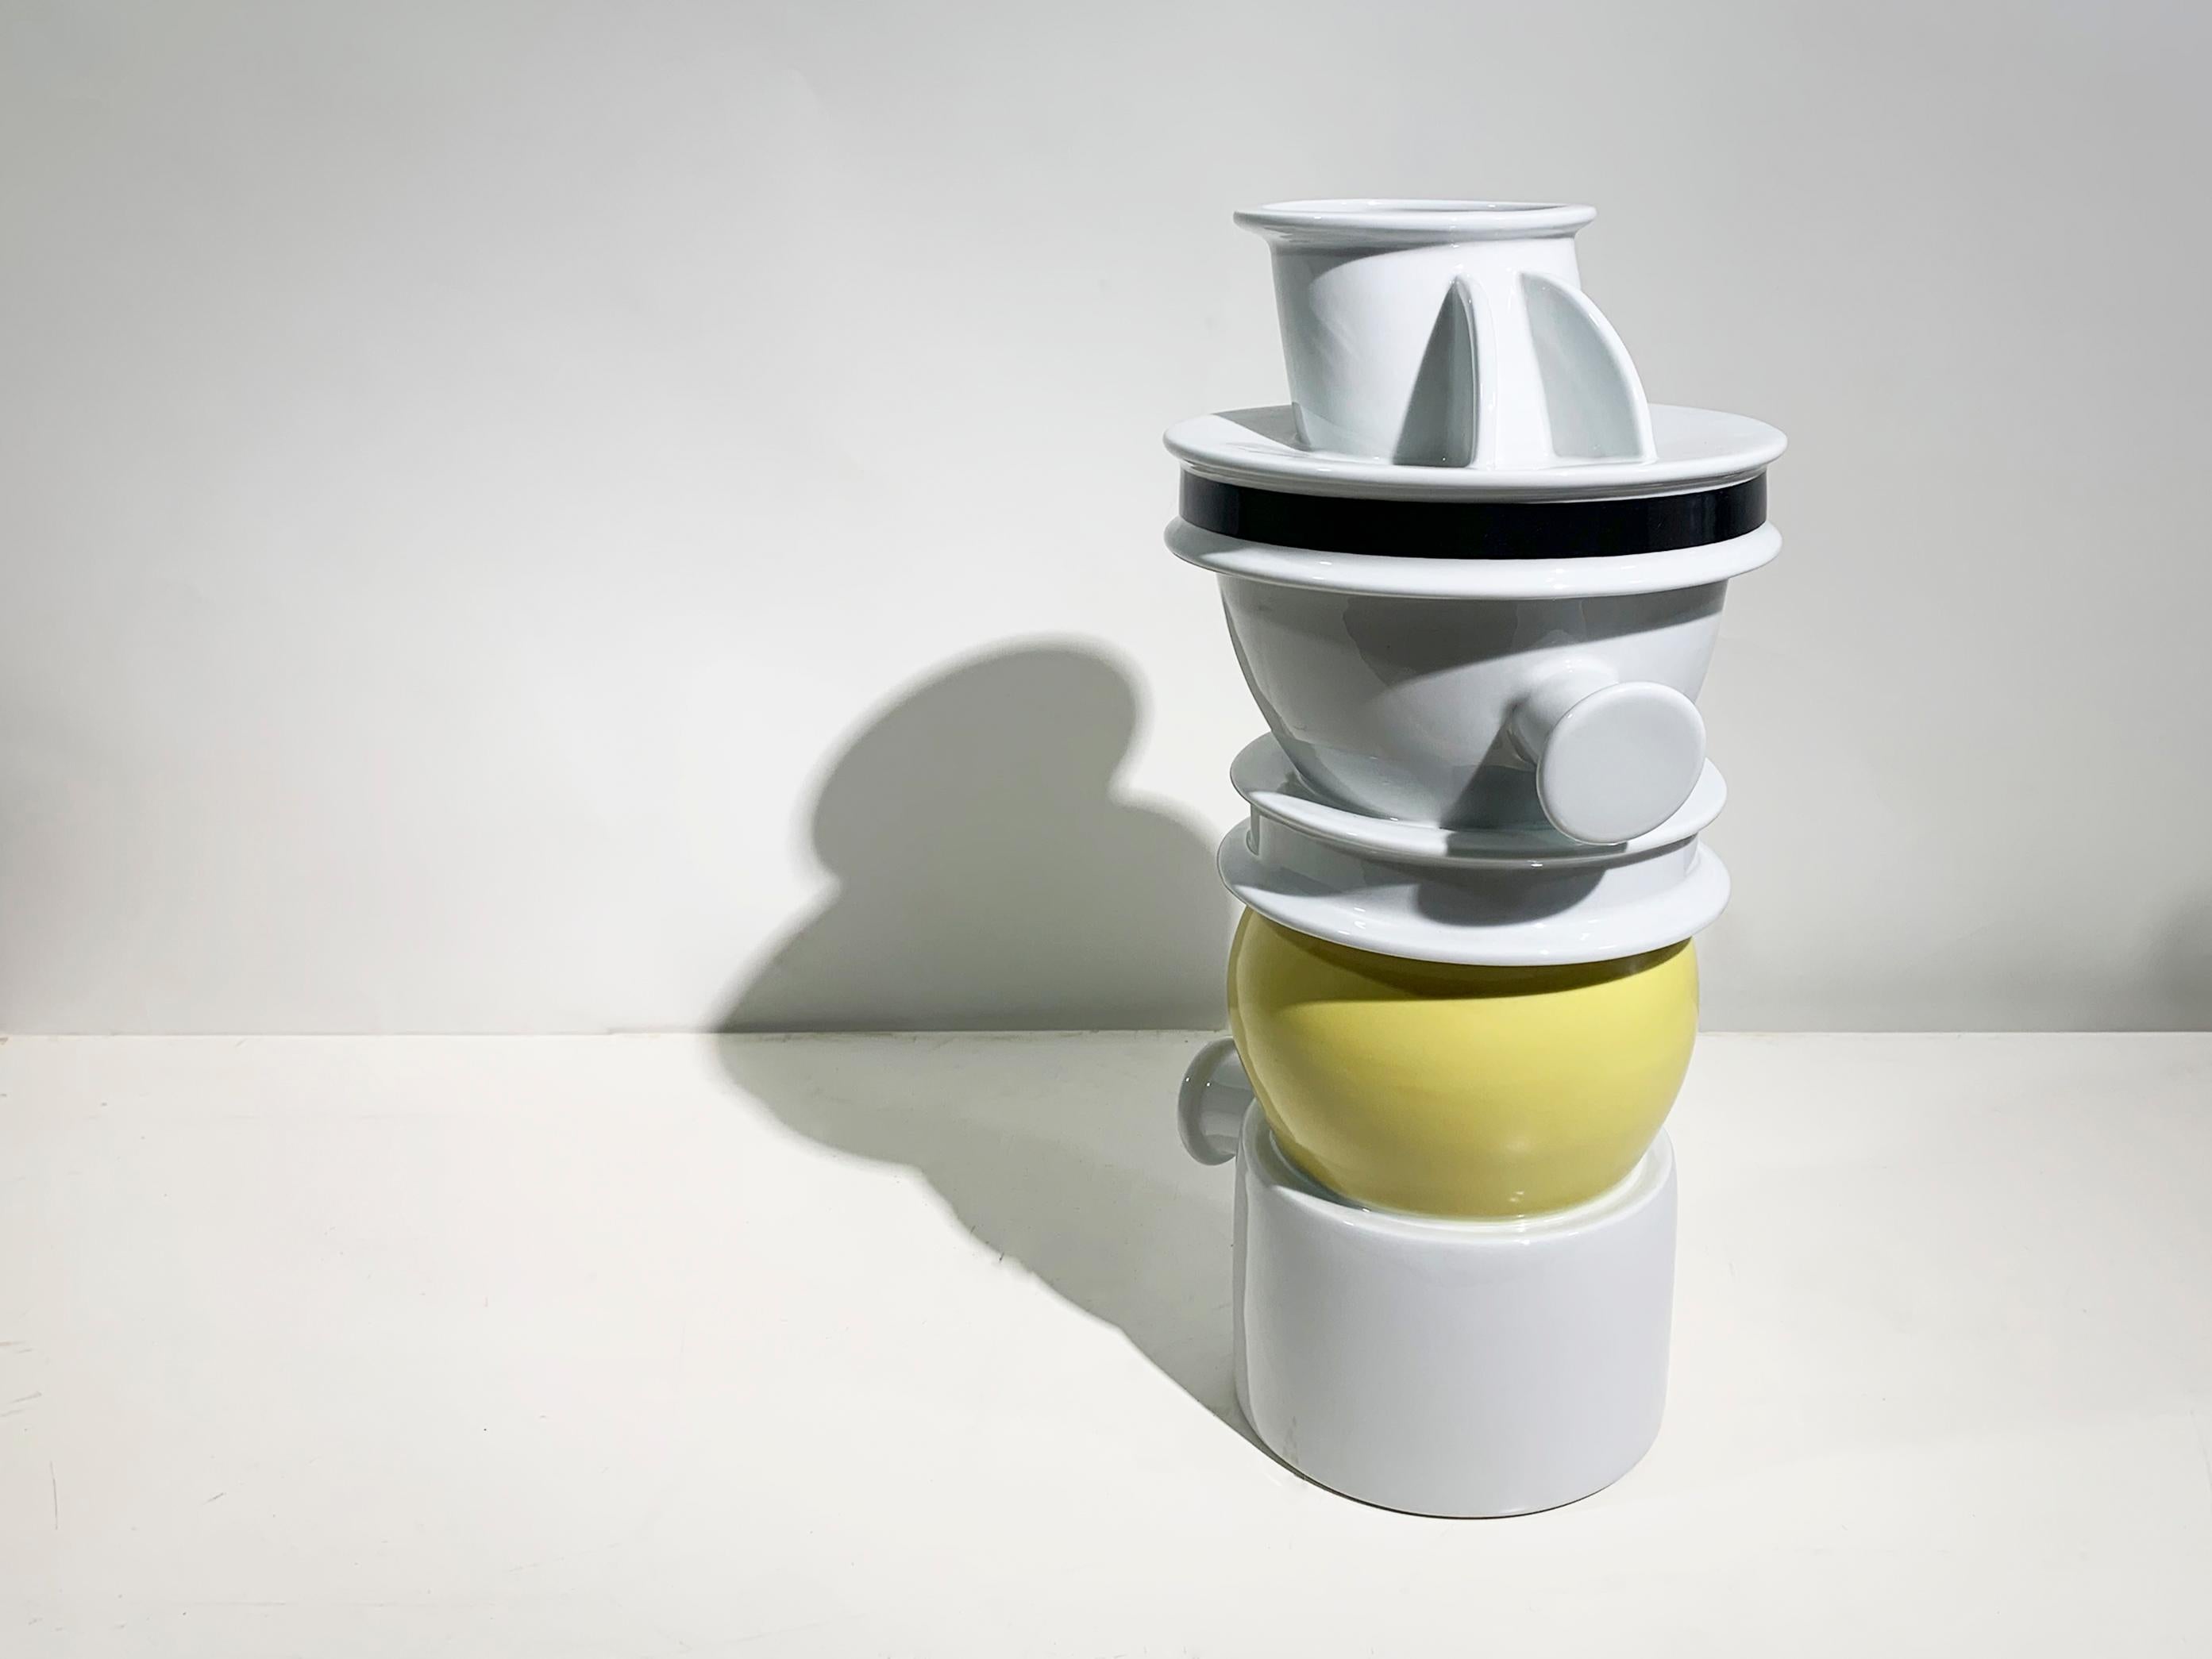 The Euphrates vase was originally designed by Ettore Sottsass in 1983 for Memphis Milano 1981-1988. A classic by Sottsass, the Euphrates porcelain vase is part of three 'rivers' vases designed for Memphis: Nilo, Tigris & Euphrates. 

